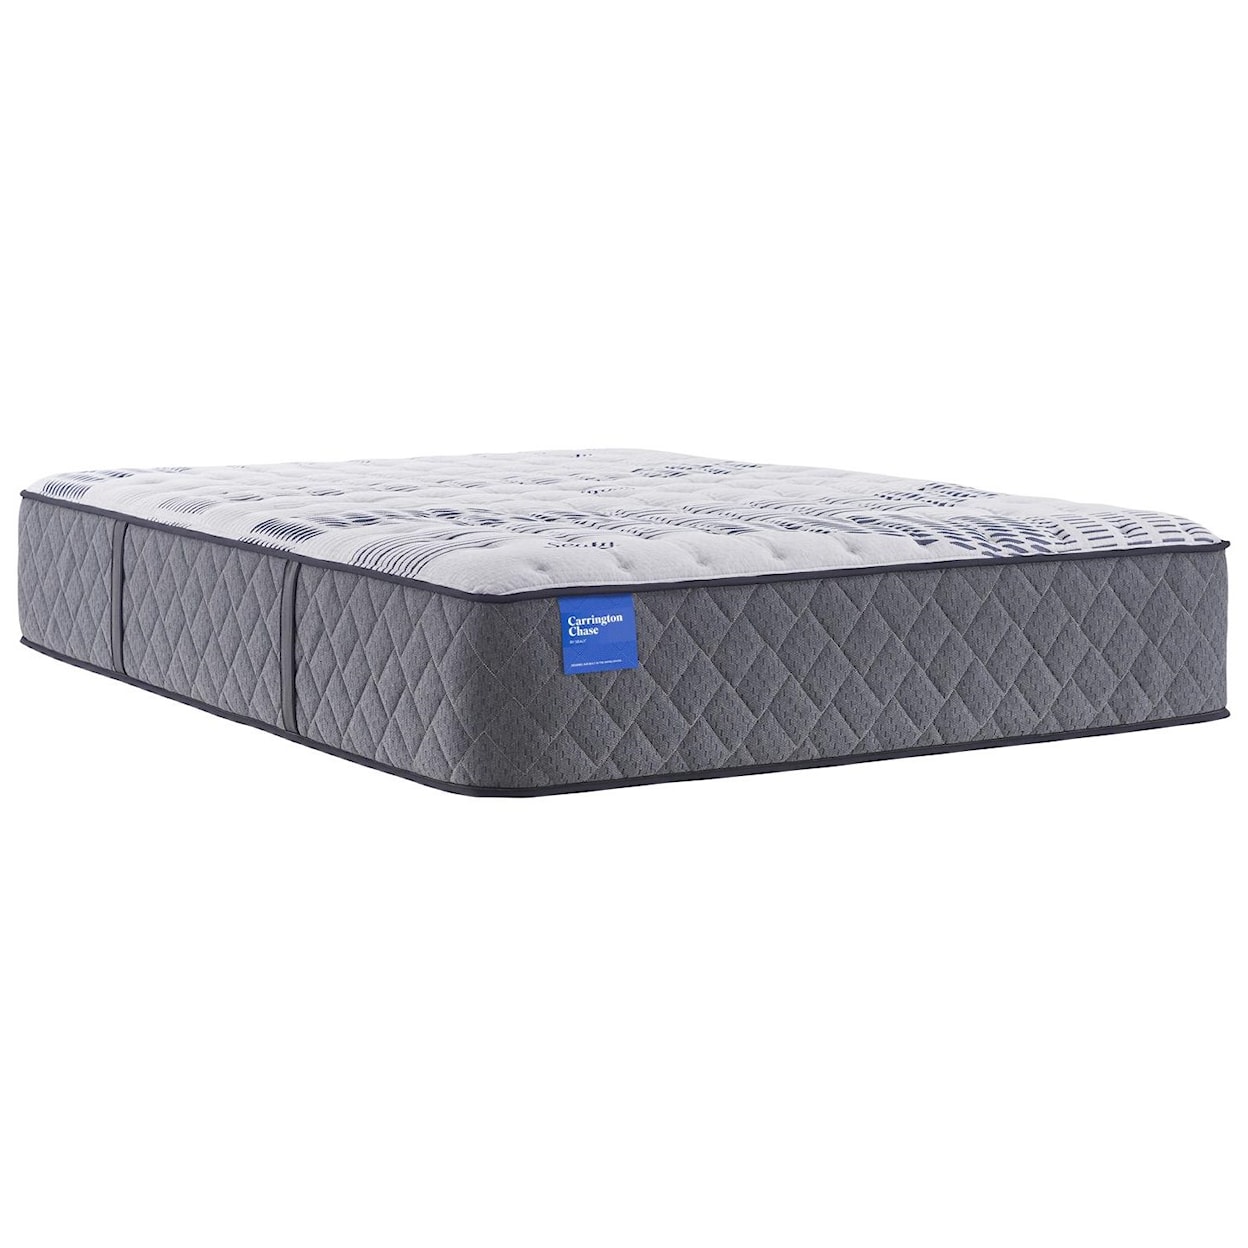 Sealy Sealy Posturepedic Stoneleigh Cushion Firm Full Sealy 14.5" Cushion Firm Mattress